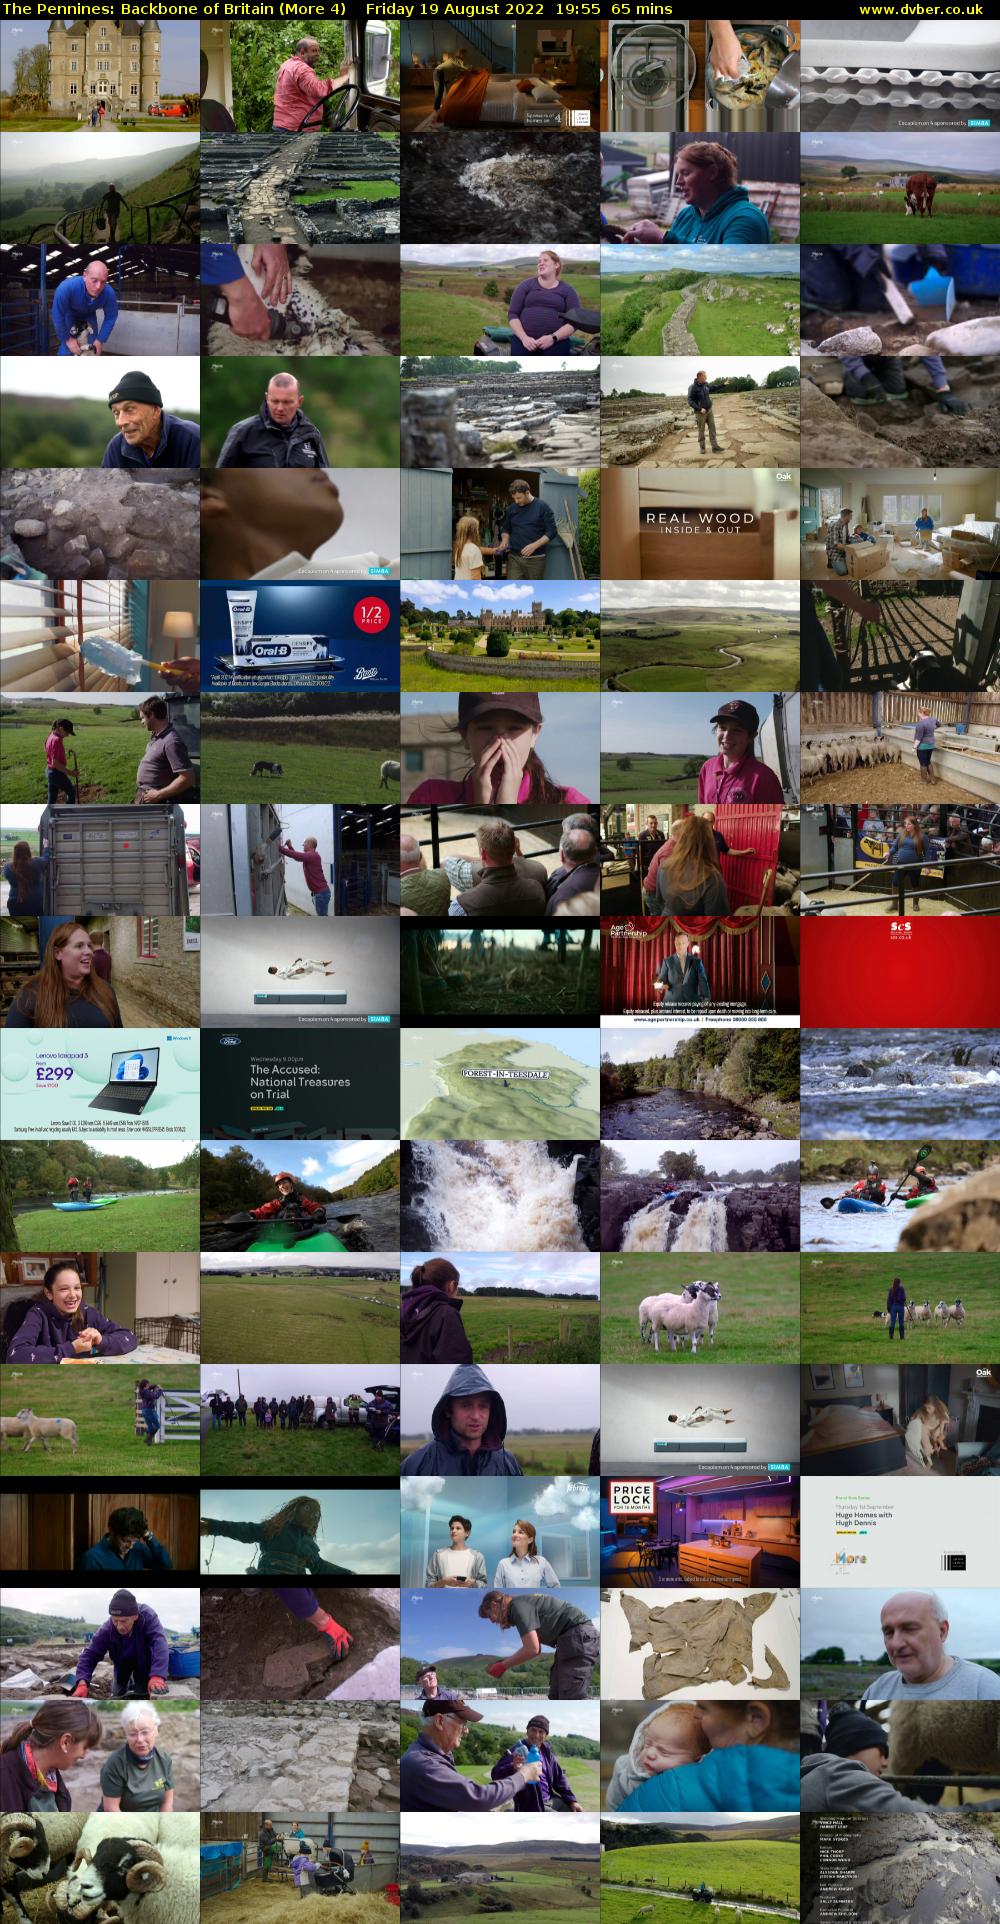 The Pennines: Backbone of Britain (More 4) Friday 19 August 2022 19:55 - 21:00